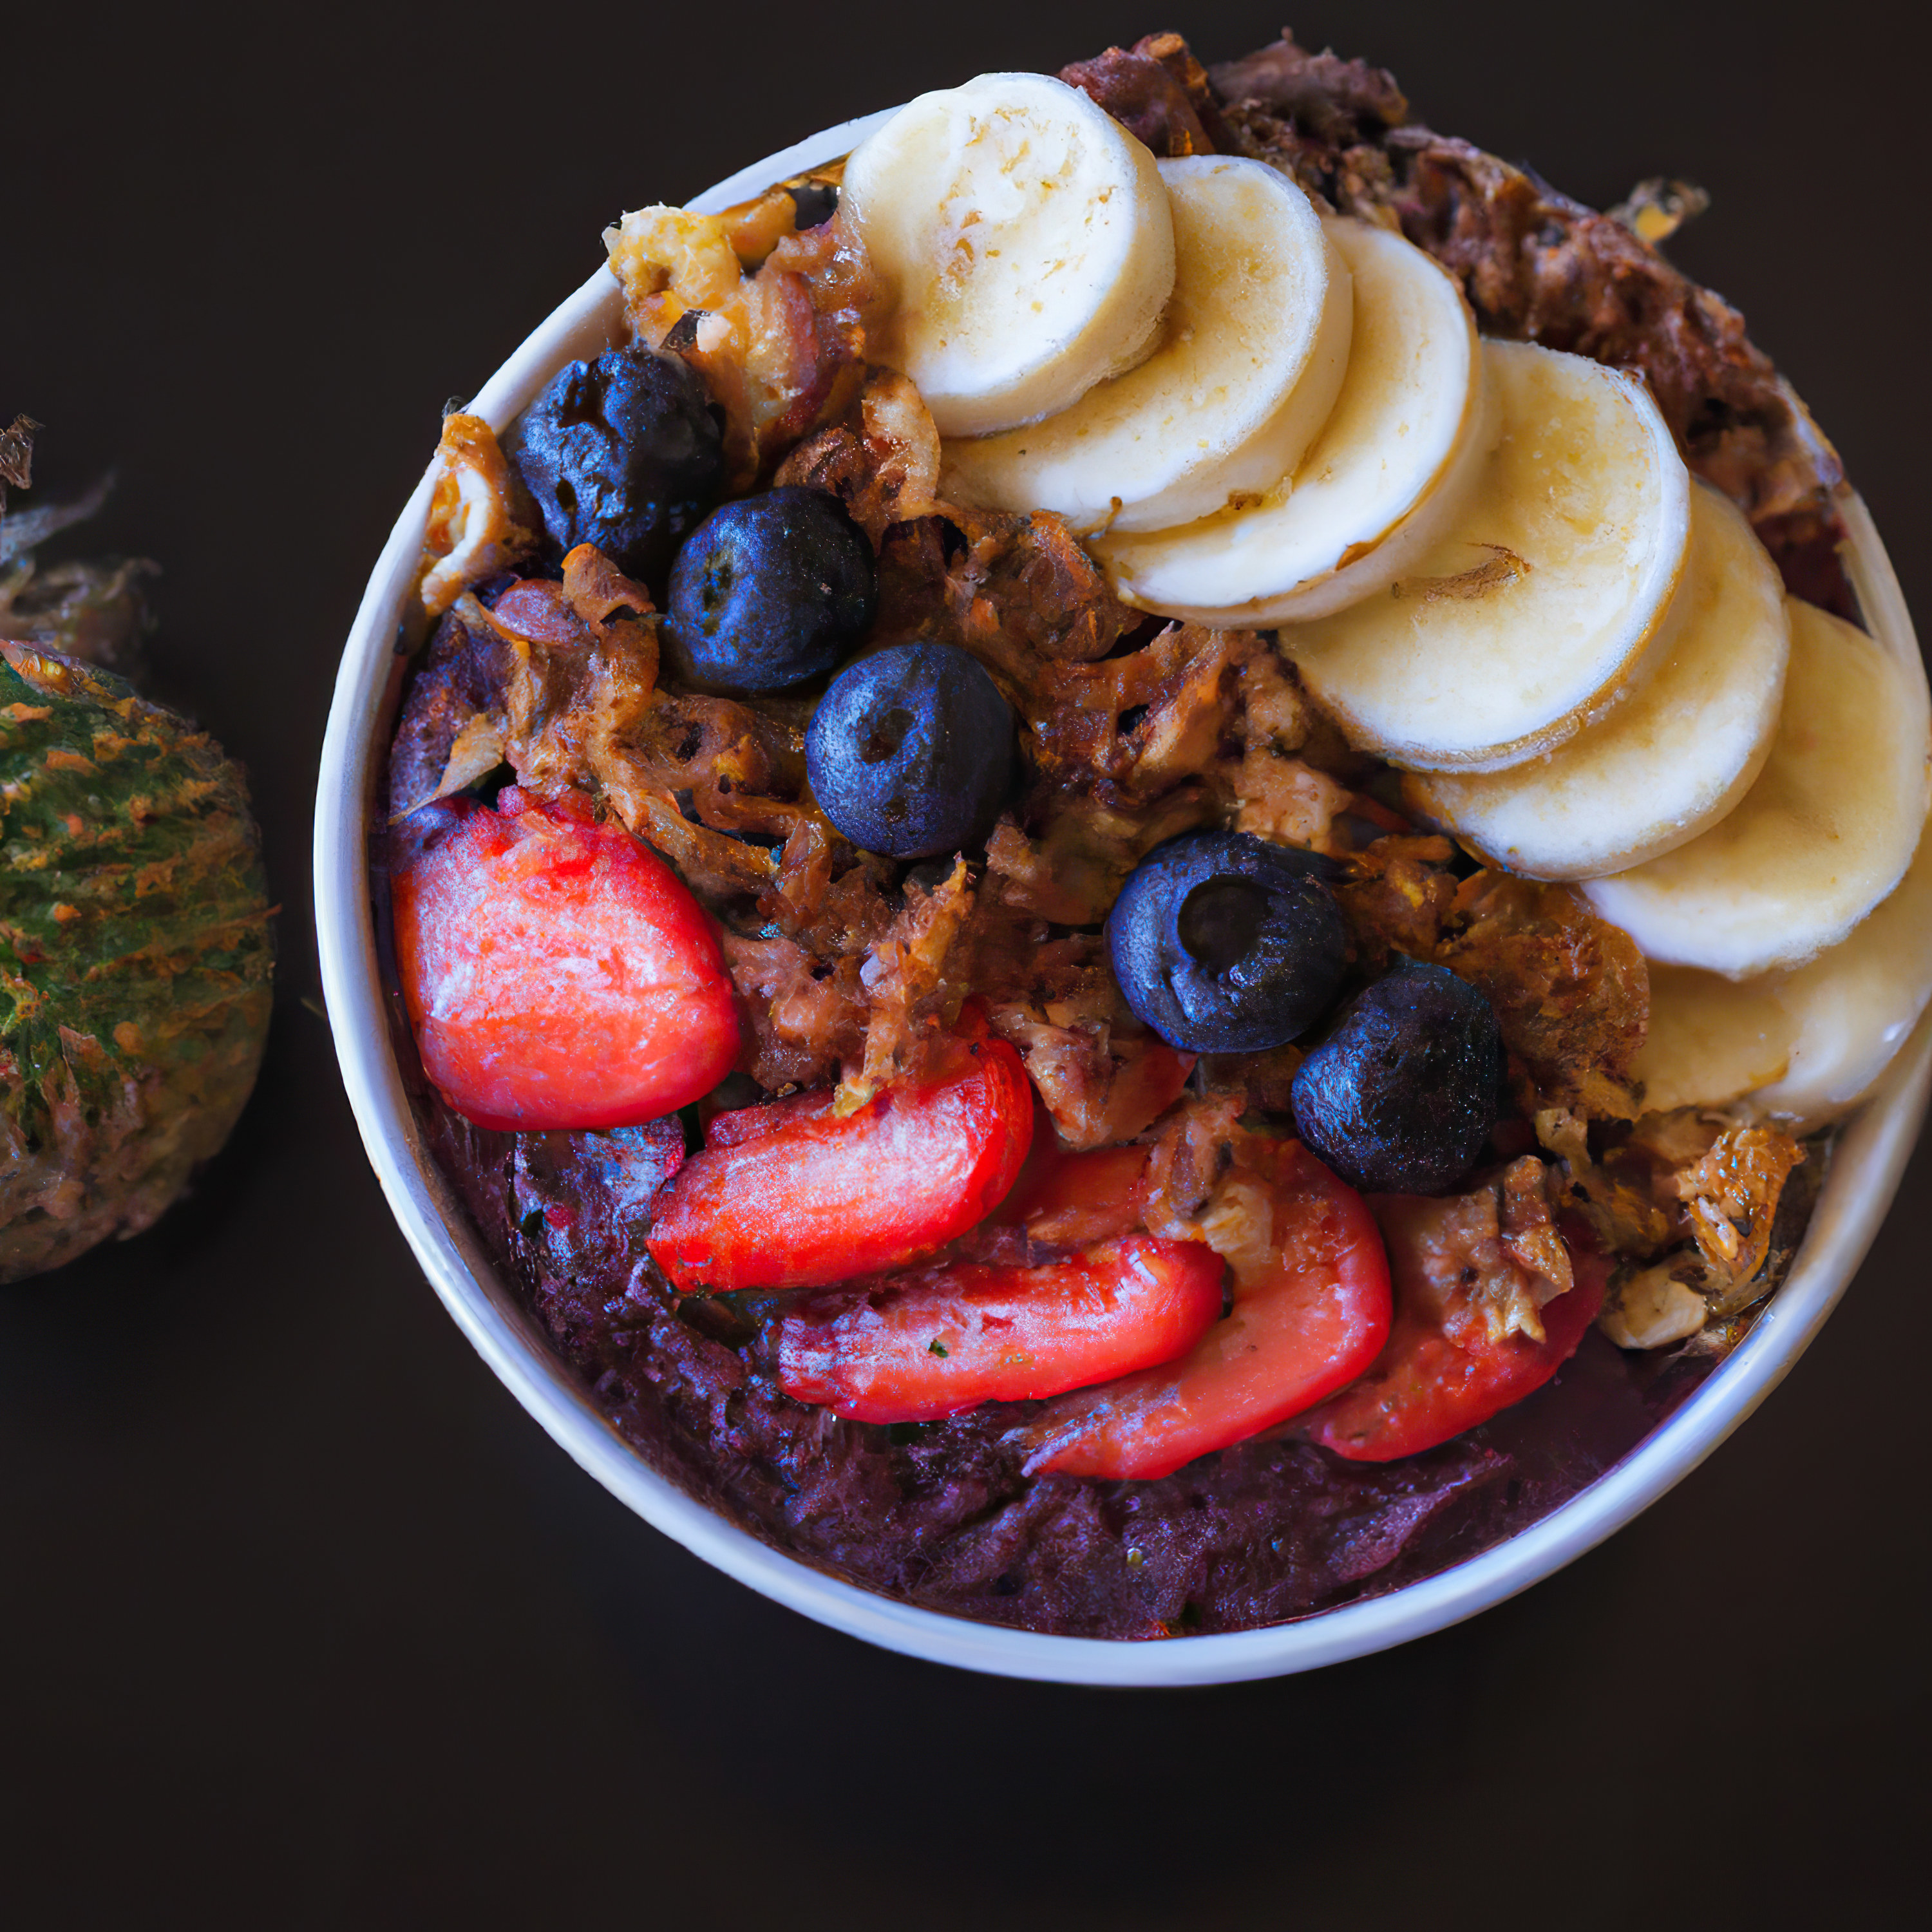 Acai bowl with strawberries, blueberries, granola and bananas in white bowl